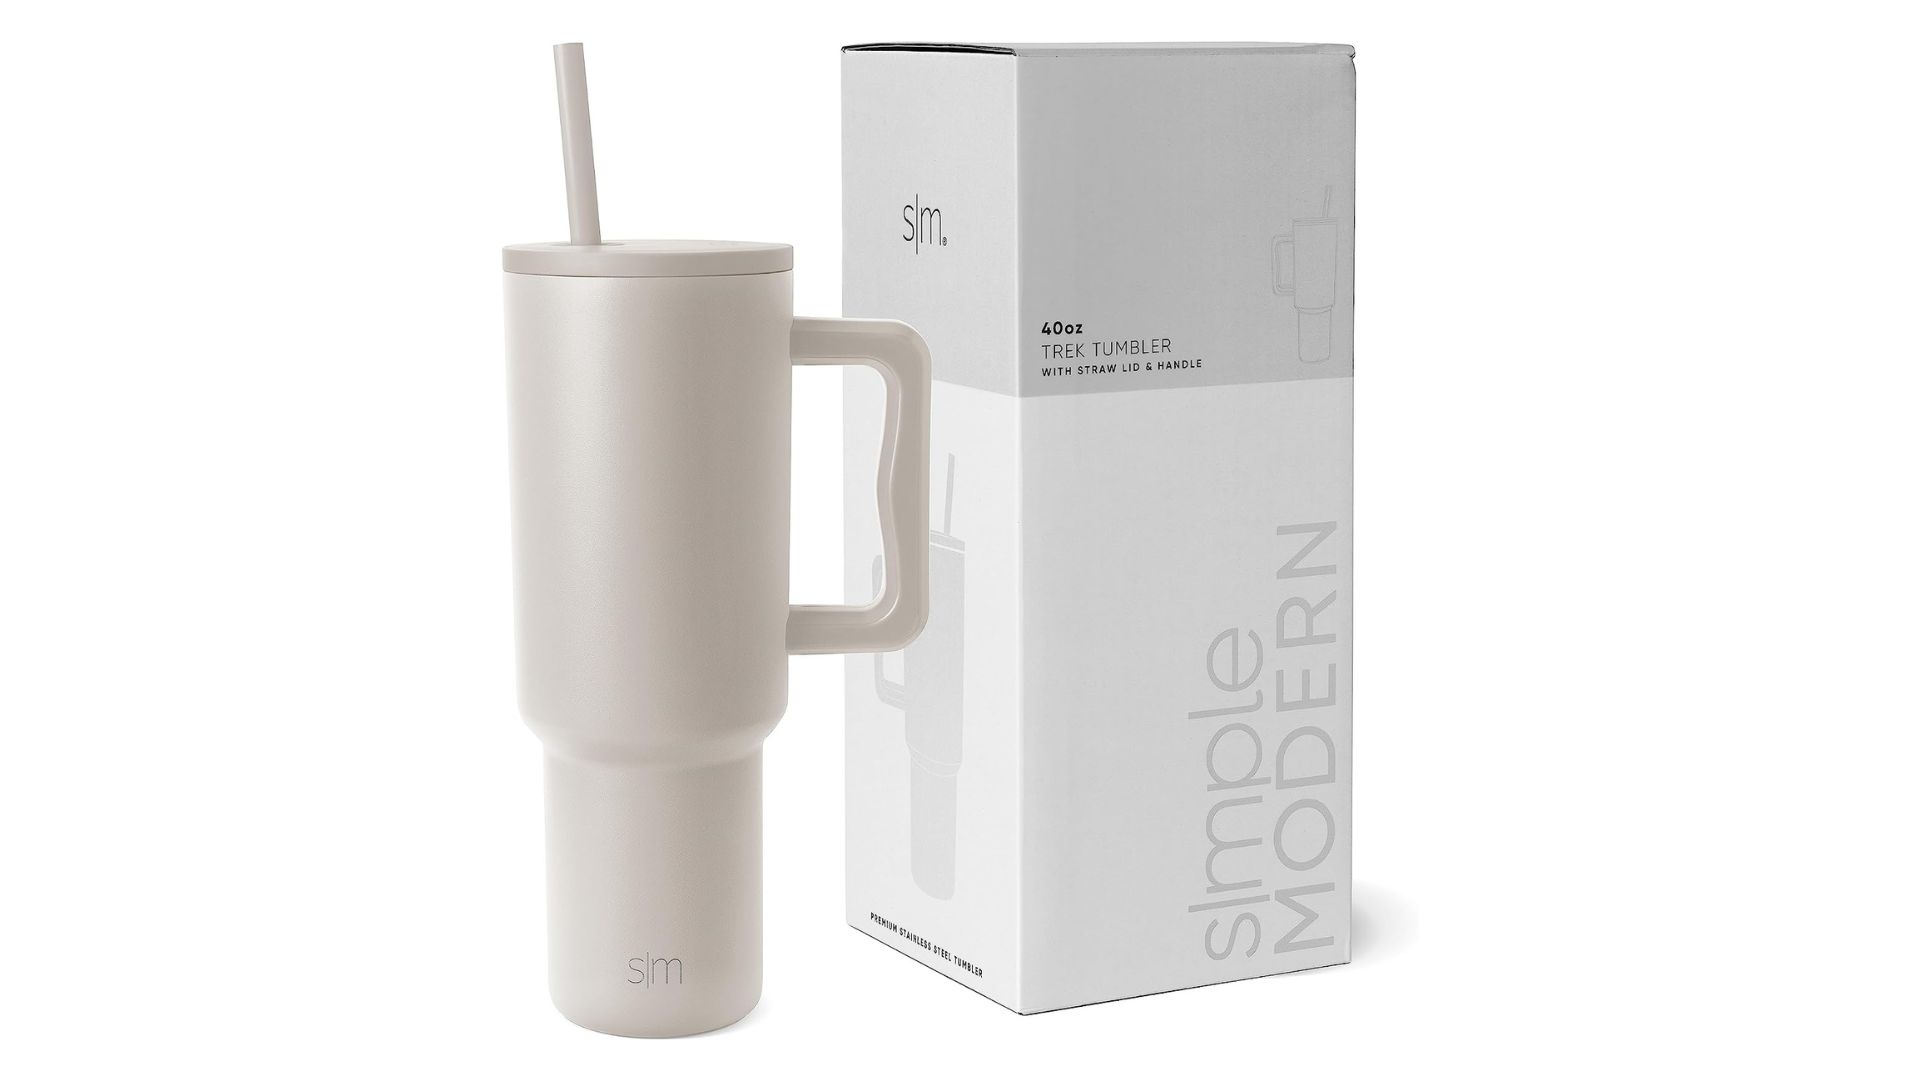 https://onecms-res.cloudinary.com/image/upload/v1690280294/mediacorp/8days/image/2023/07/25/06_simple_modern_40_oz_tumbler_with_handle_and_straw_lid.jpg